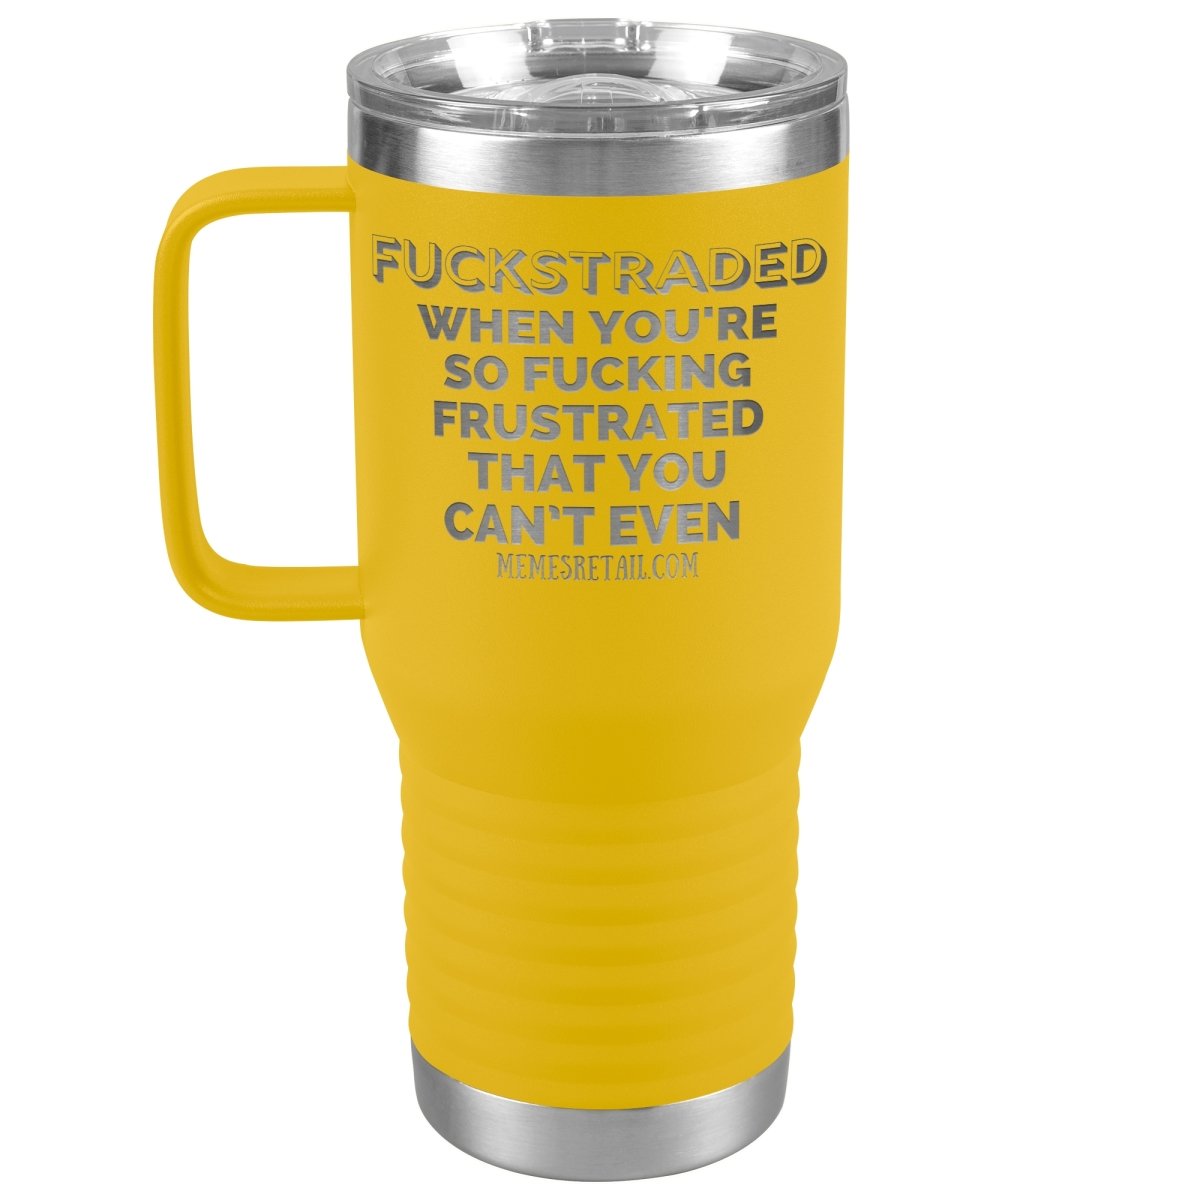 Fuckstraded, When You're So Fucking Frustrated That You Can’t Even Tumblers, 20oz Travel Tumbler / Yellow - MemesRetail.com